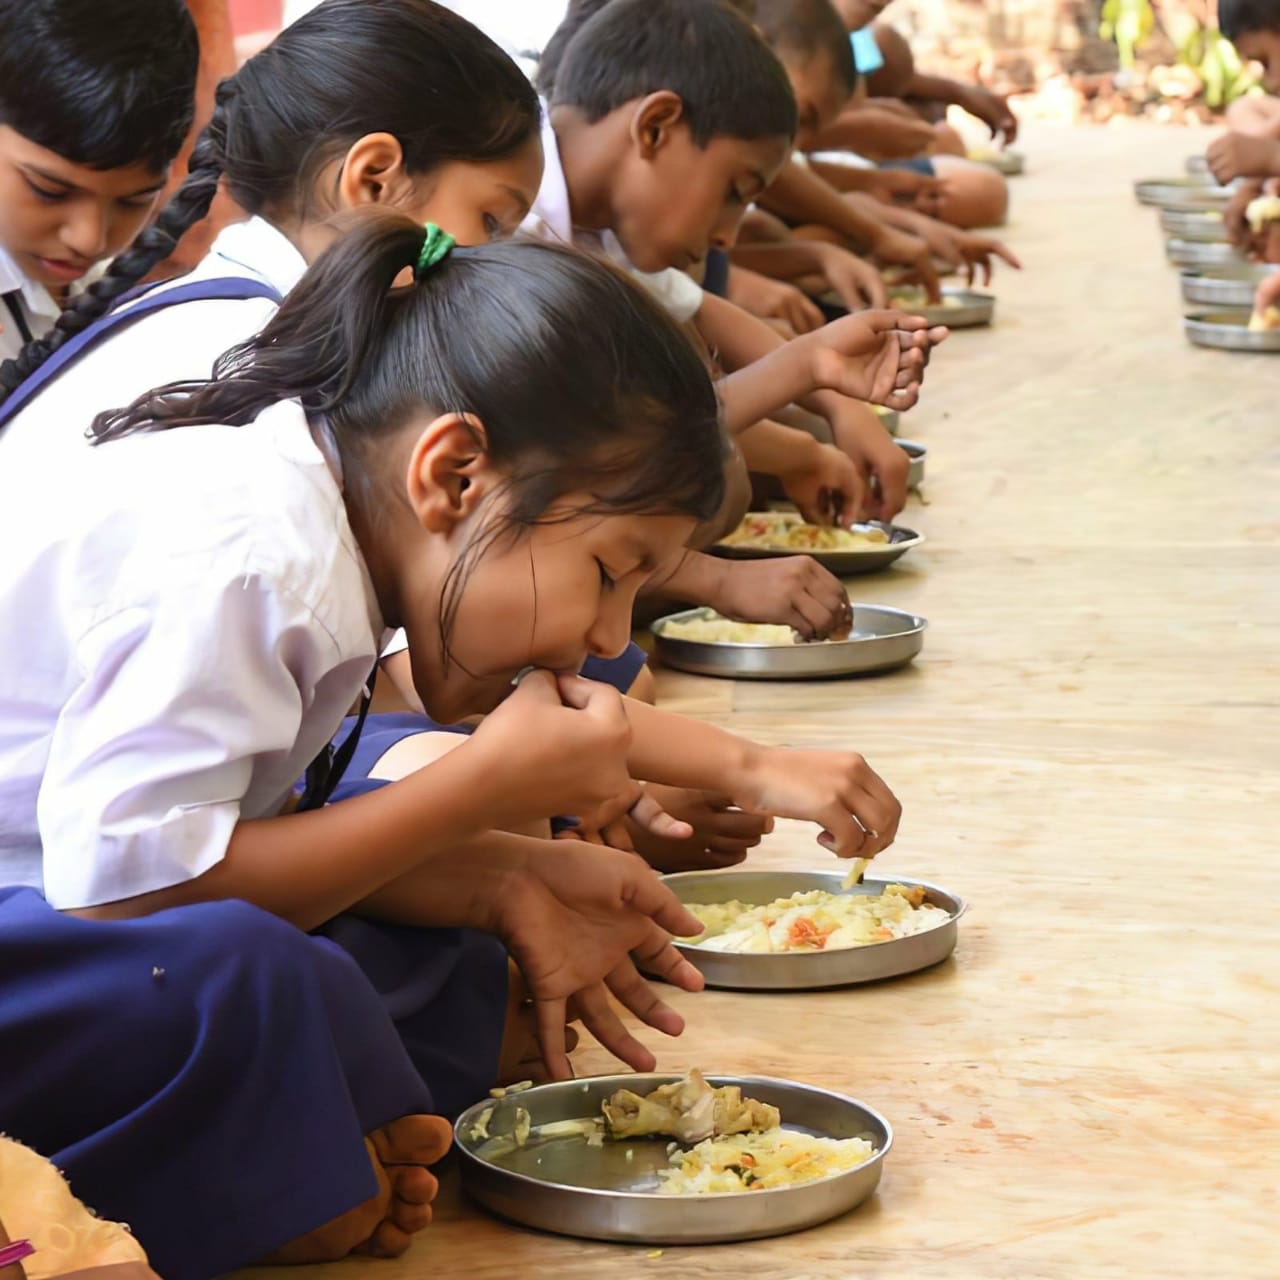 Assam: Over 40 students fall sick after eating midday meal in Boko